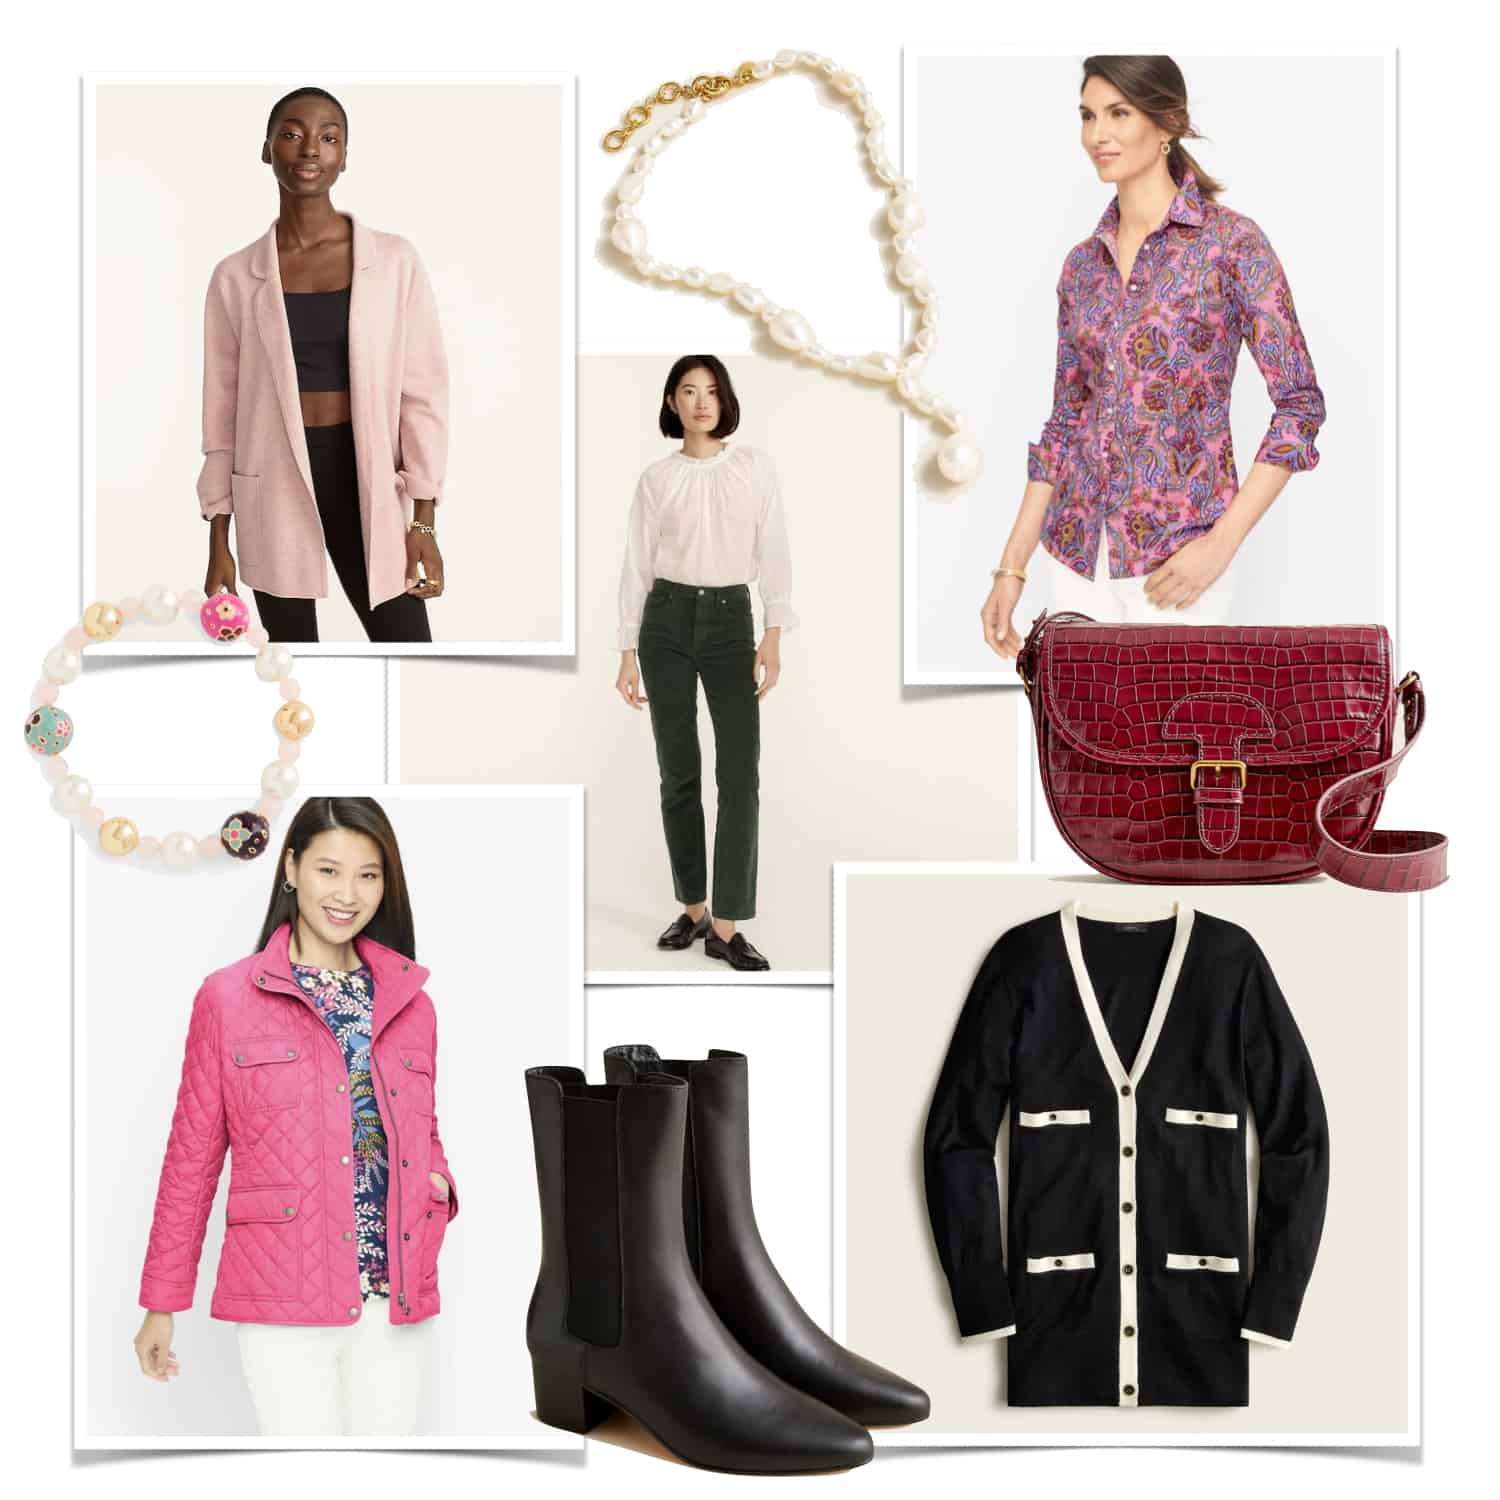 More new-for-fall finds (and they’re all marked down!)